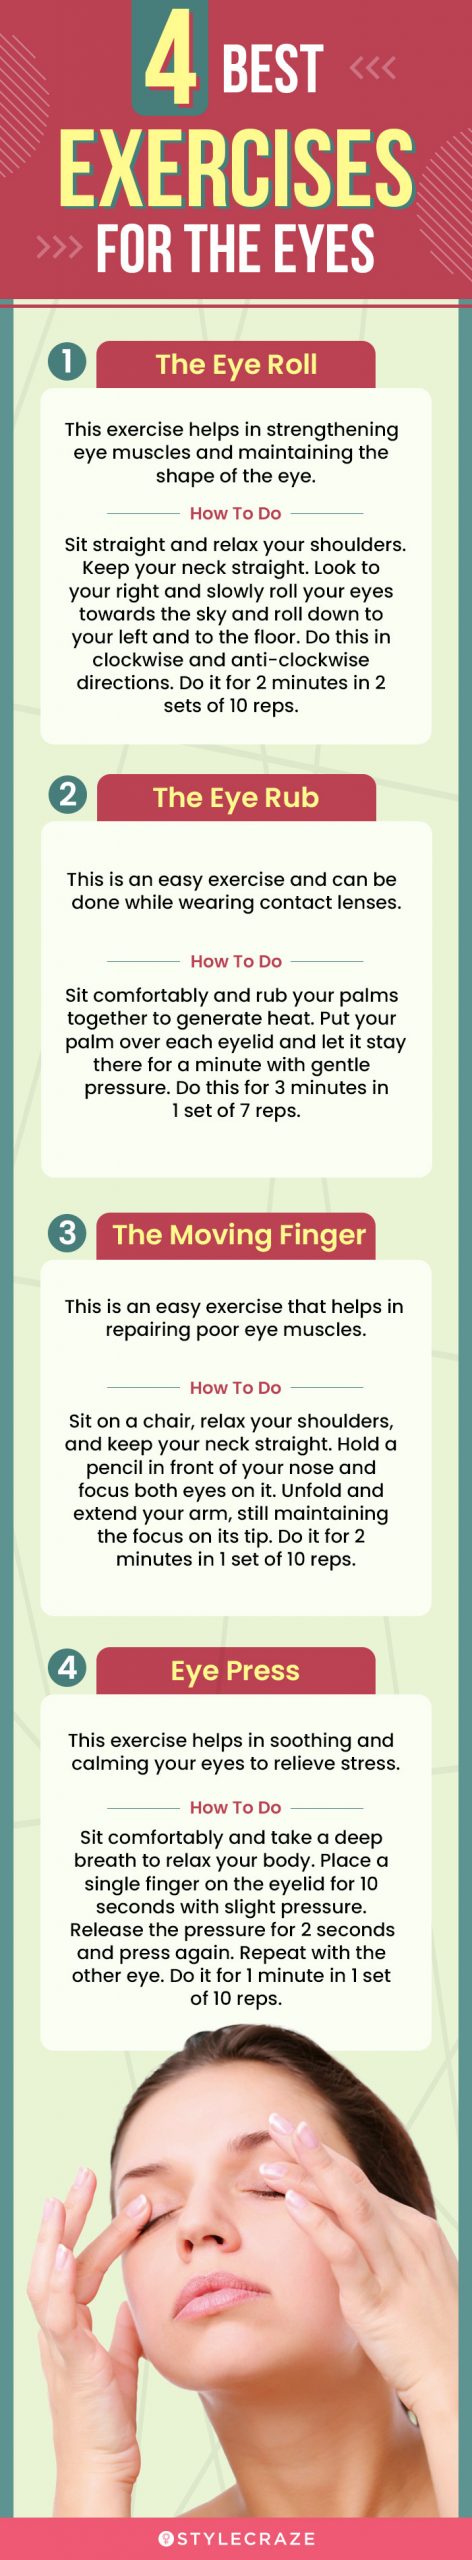 4 best exercises for eyes (infographic)